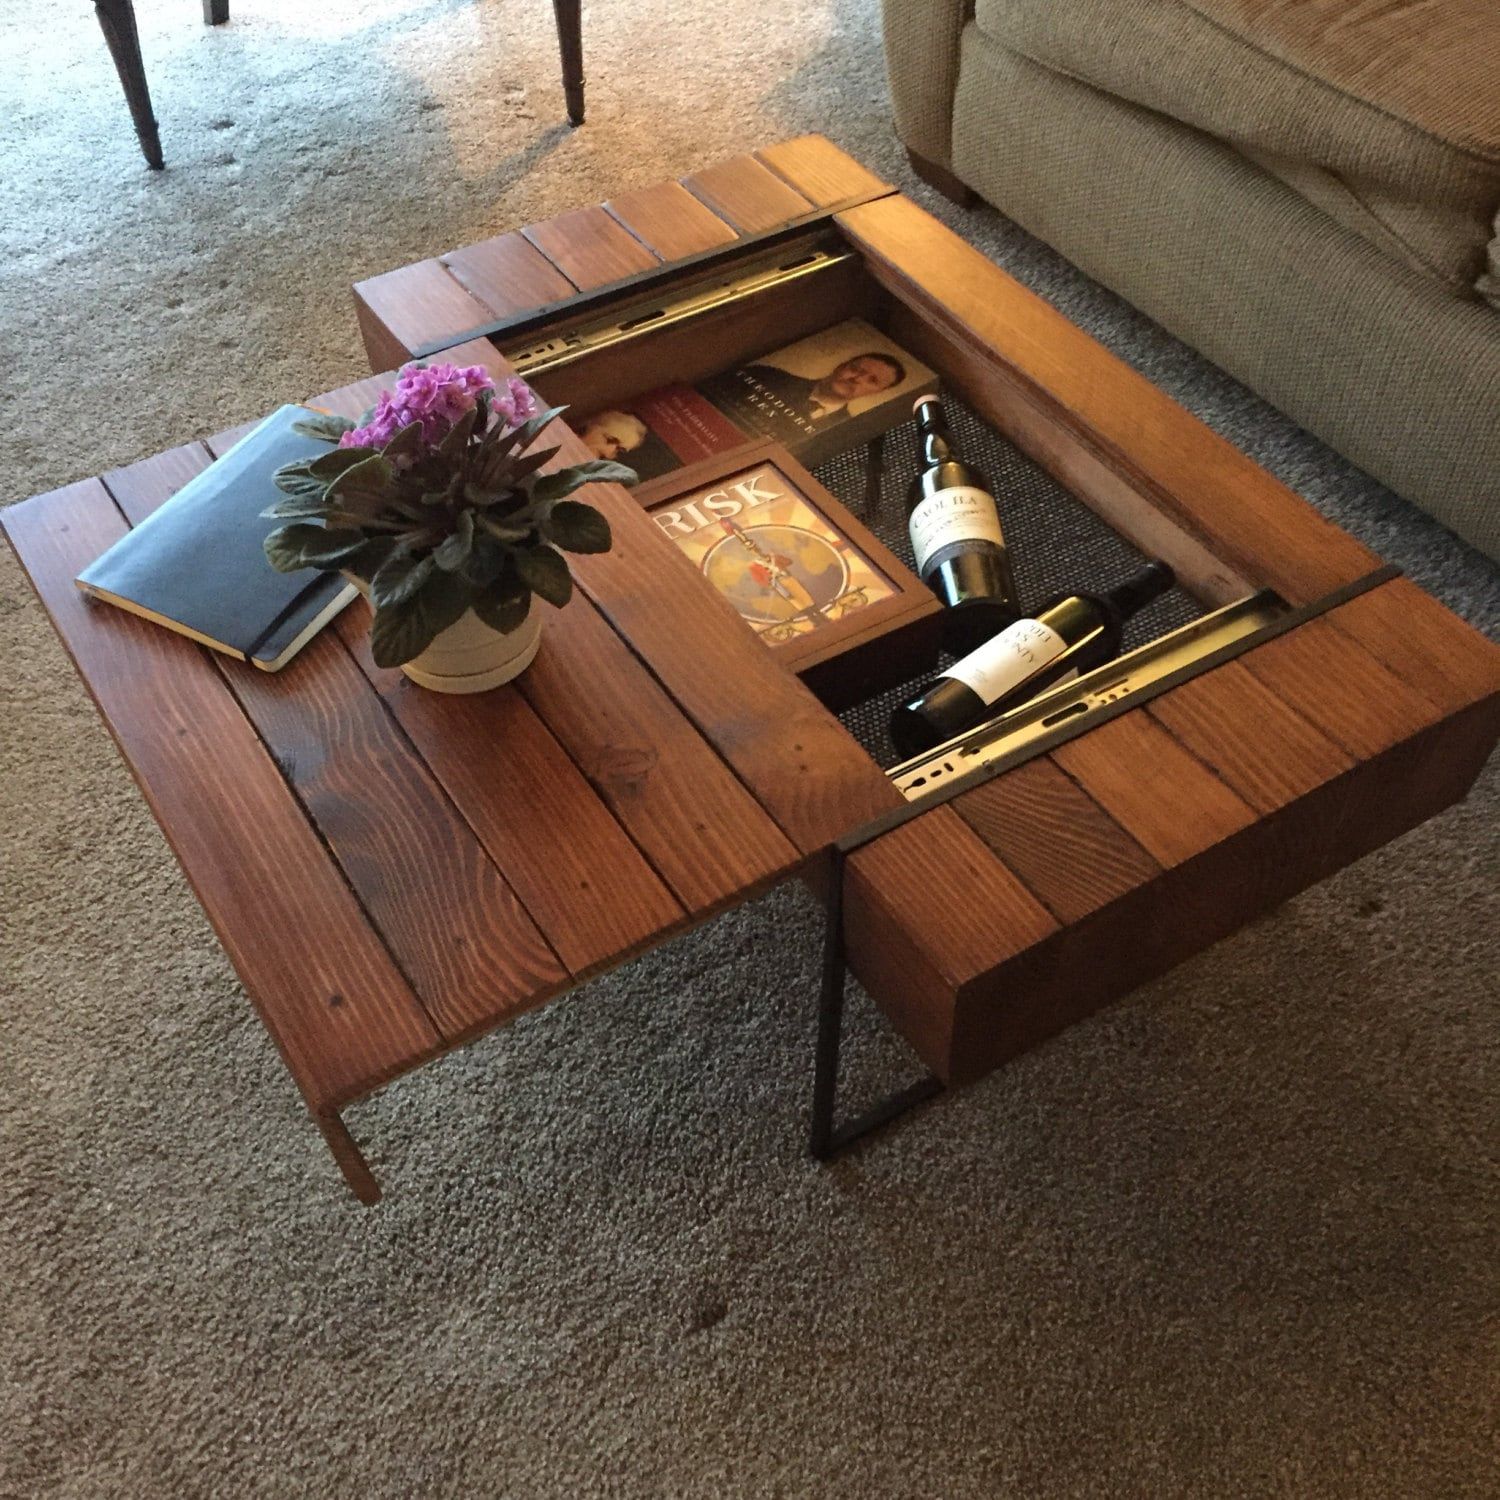 Block Coffee Table With Hidden Storage Intended For Modern Coffee Tables With Hidden Storage Compartments (View 9 of 15)